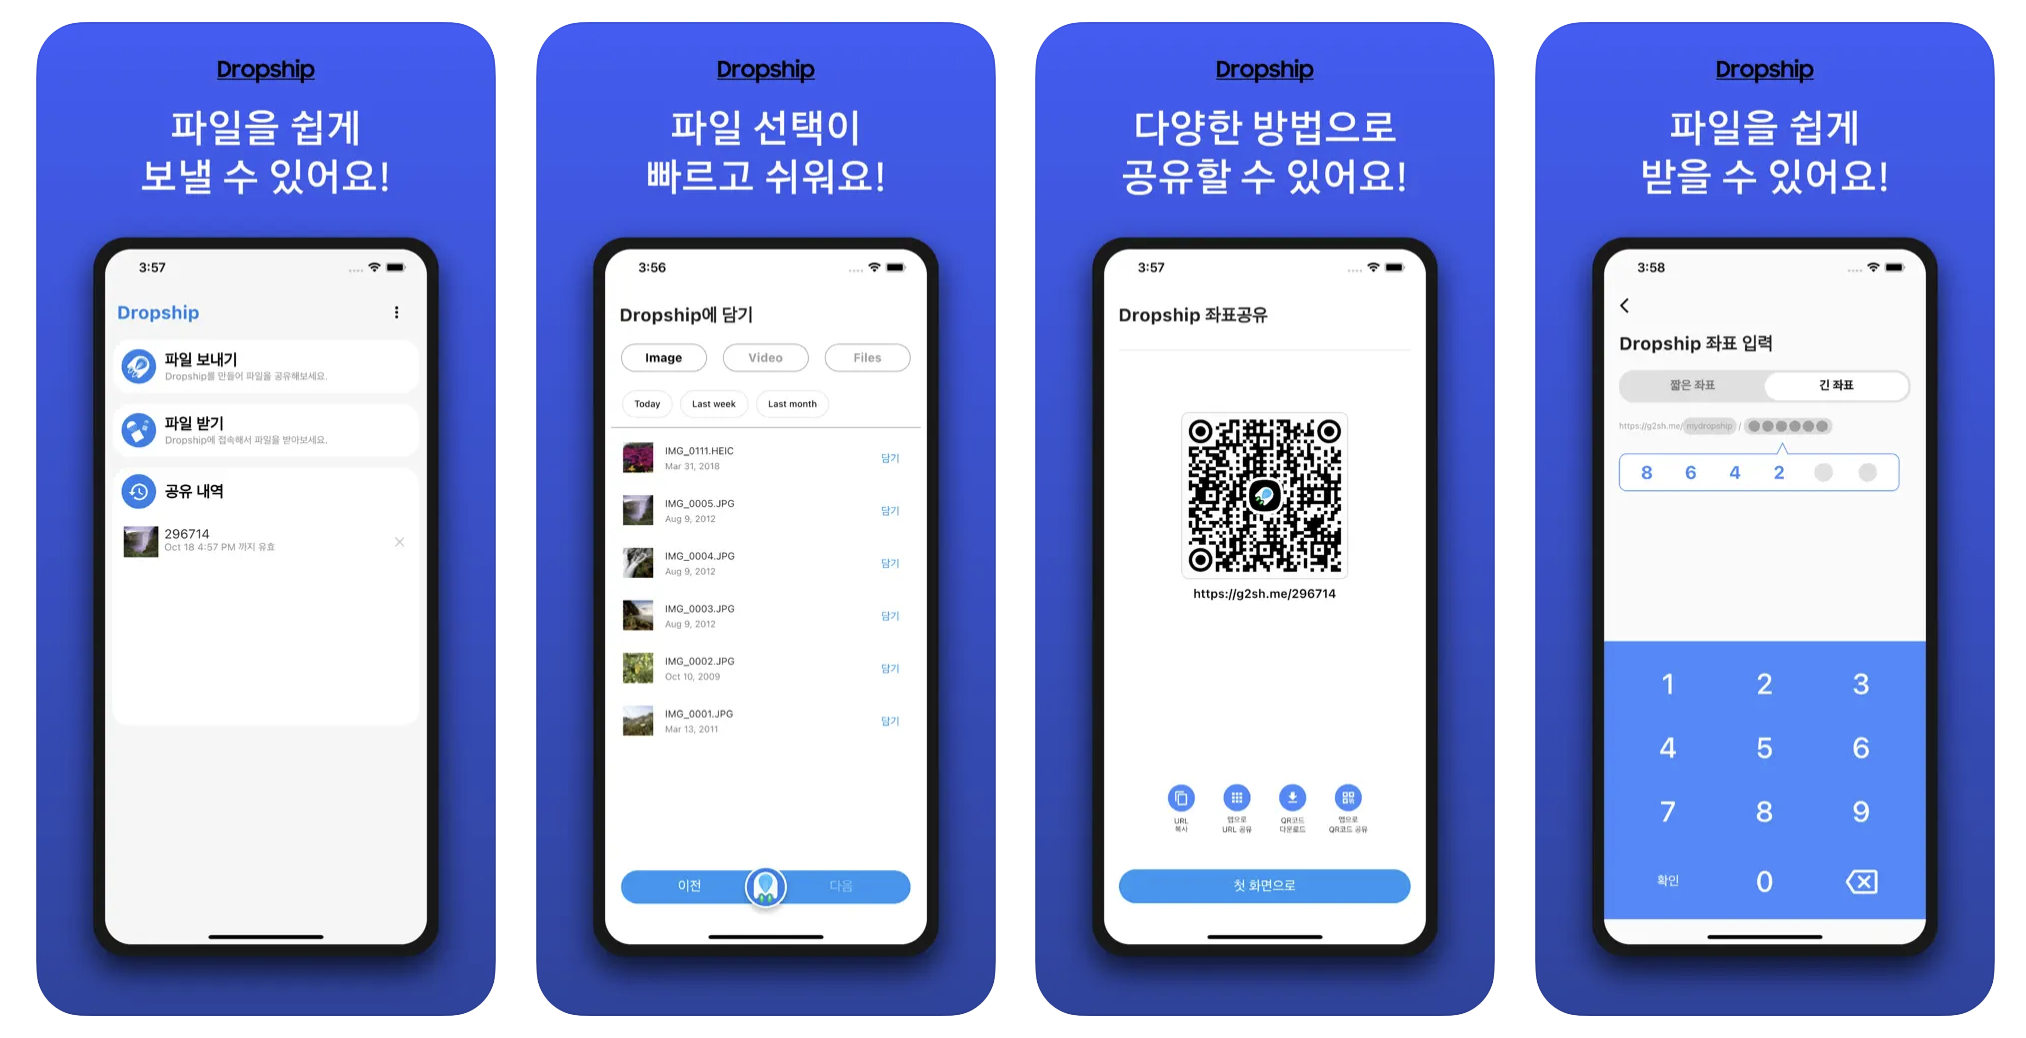 Samsung Dropship app can transfer files from your Galaxy phone to any device (even iPhones)